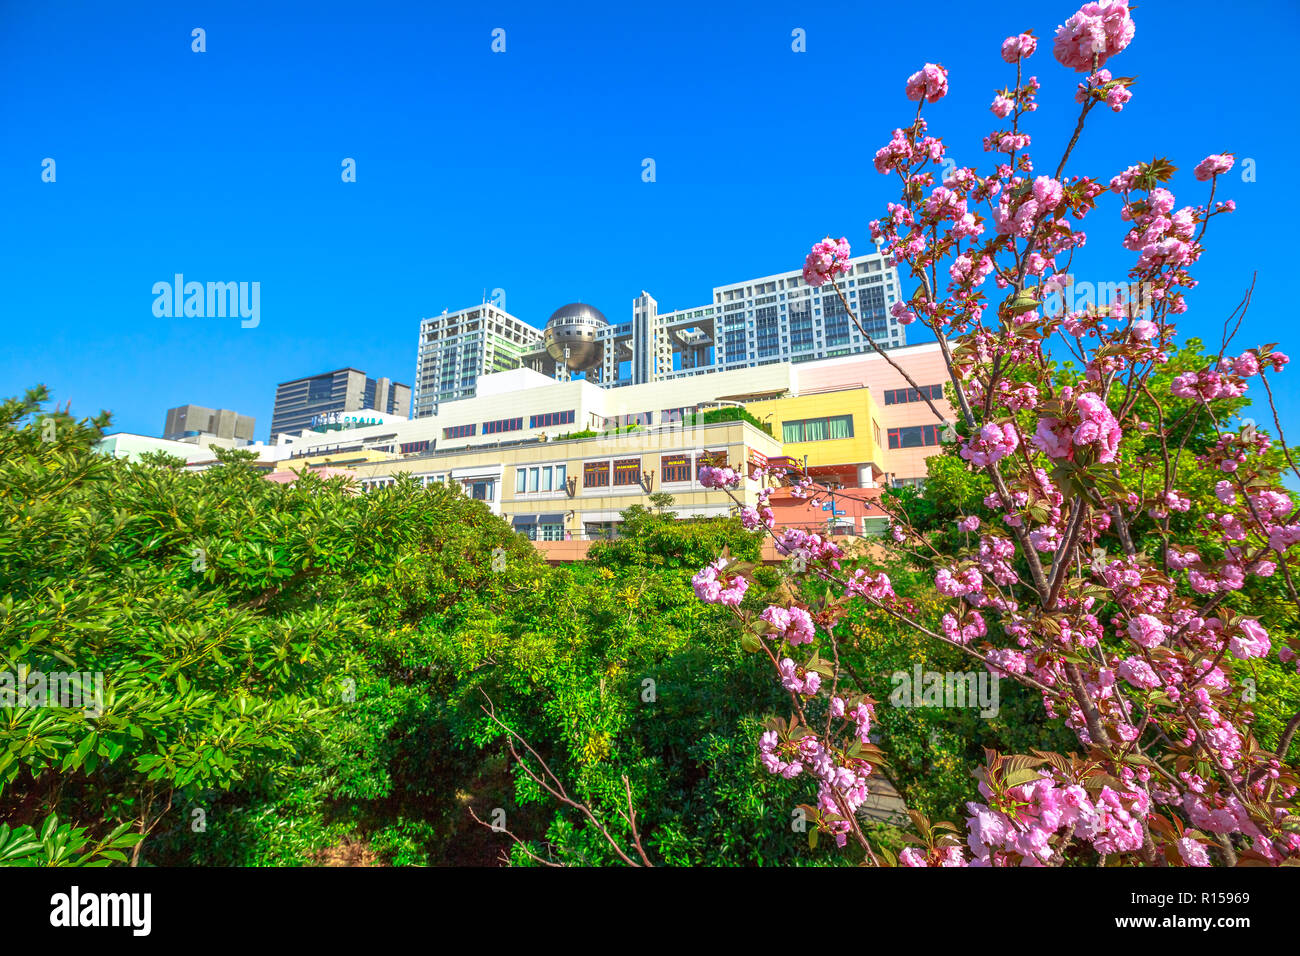 Tokyo, Japan - April 19, 2017: Fuji Television Headquarters in Odaiba, Minato district with branch of cherry blossom in the foreground. Spring landscape. Icon and landmarks of Odaiba island. Stock Photo